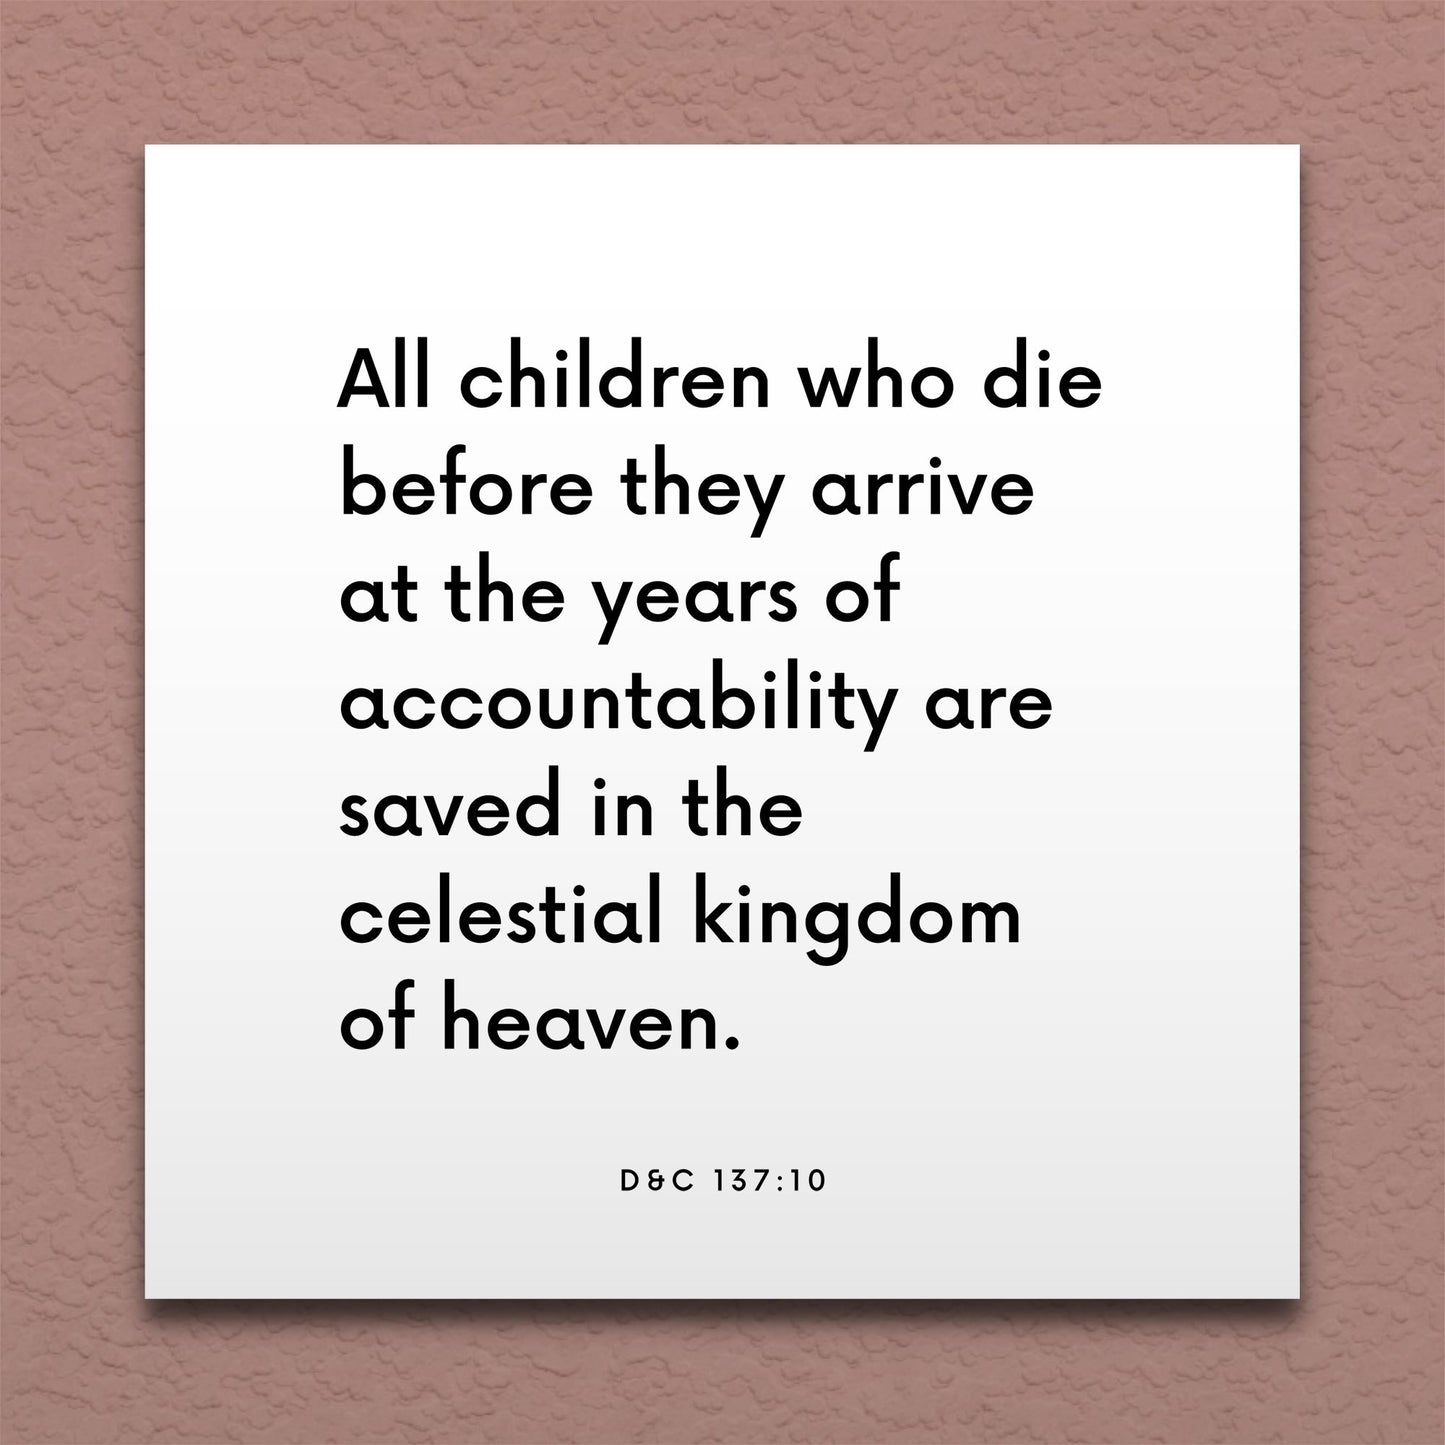 Wall-mounted scripture tile for D&C 137:10 - "All children who die before the years of accountability"